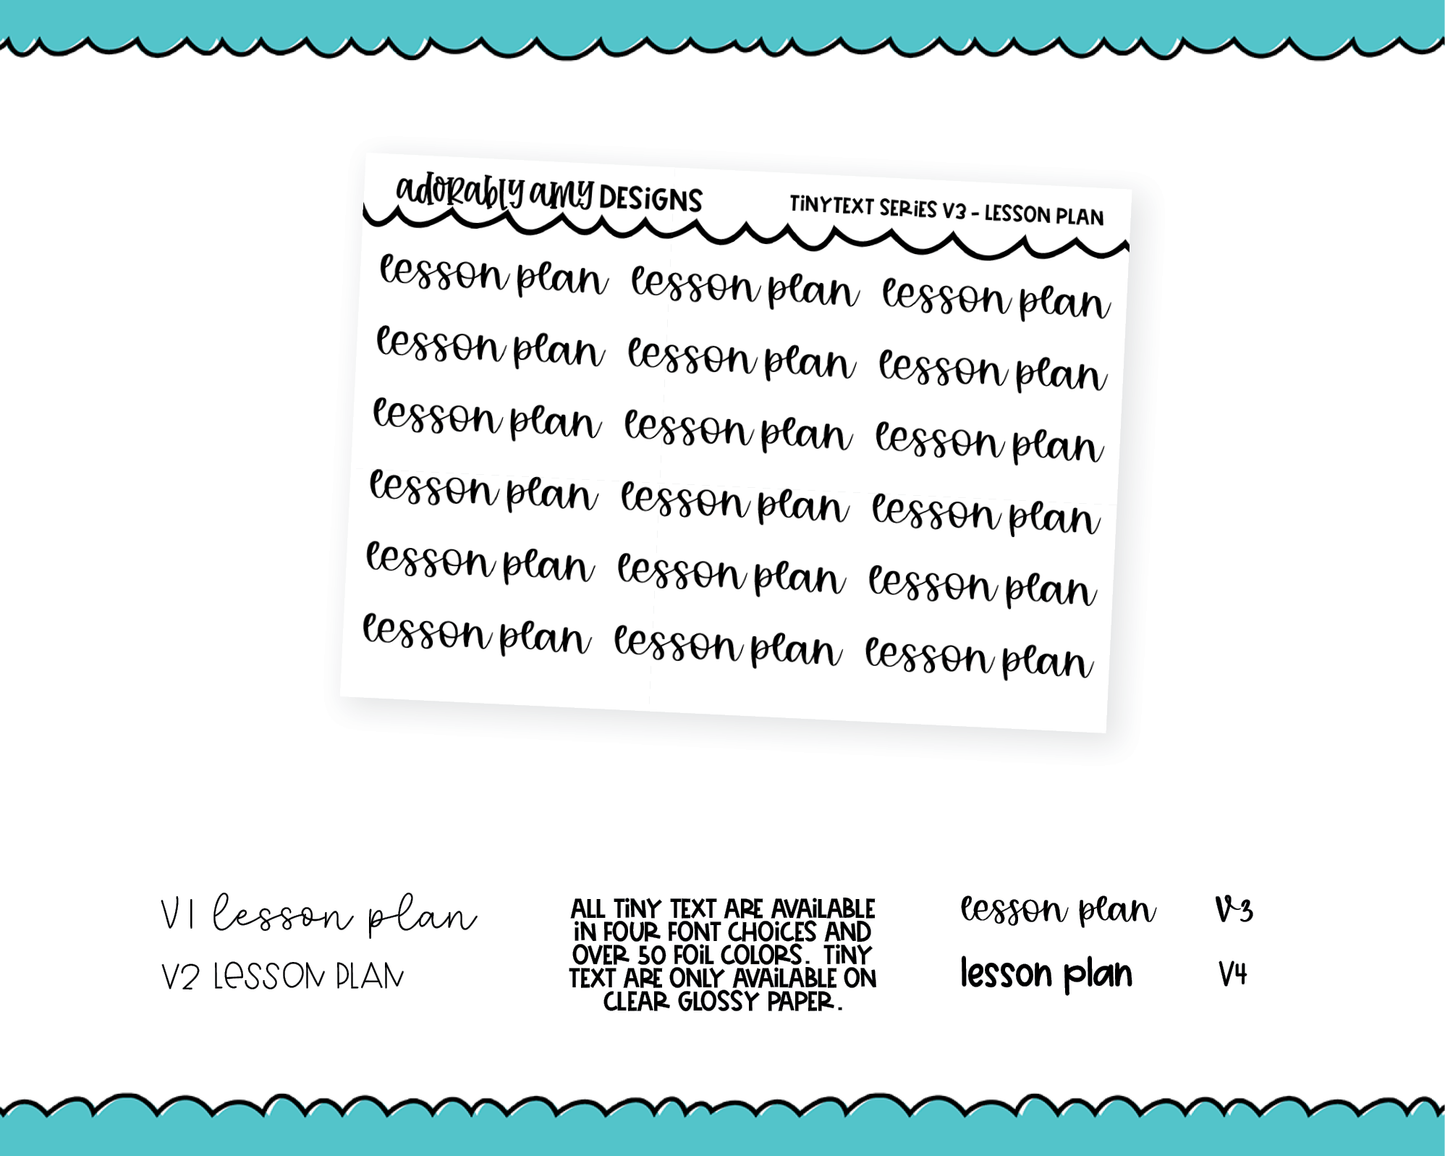 Foiled Tiny Text Series - Lesson Plan Checklist Size Planner Stickers for any Planner or Insert